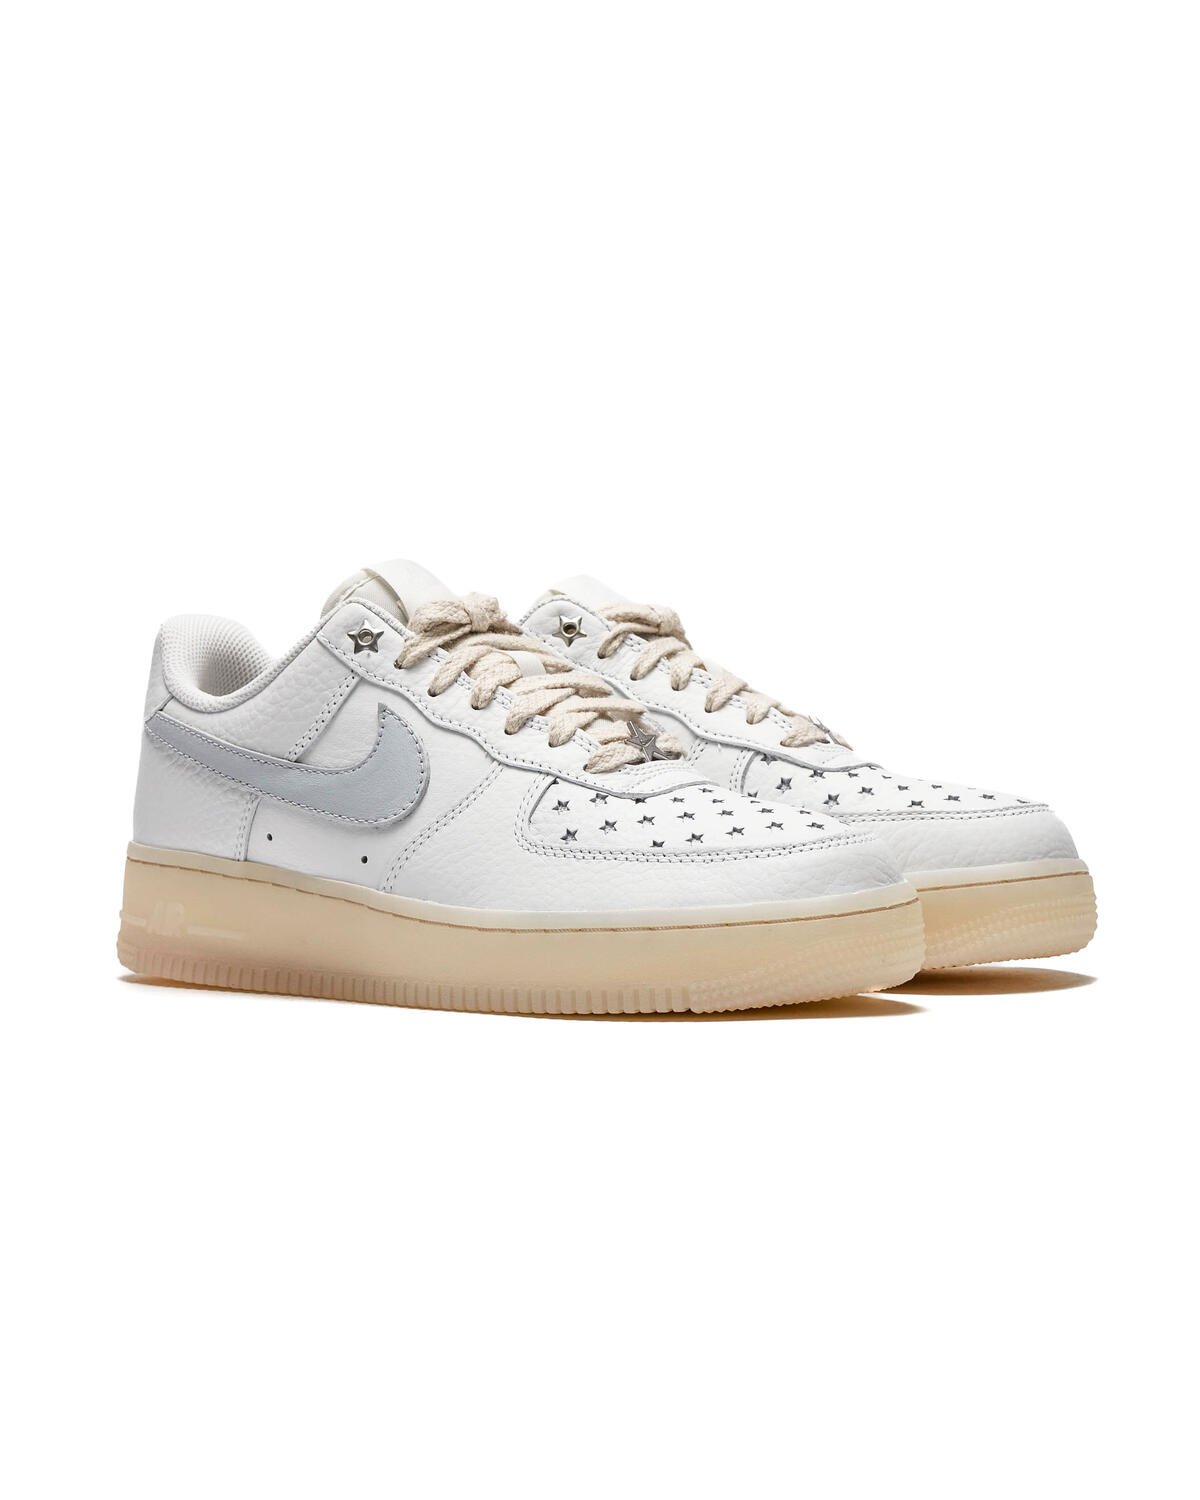 Nike Air Force 1 LV8 KSA Athletic Shoes 'Worldwide Pack'